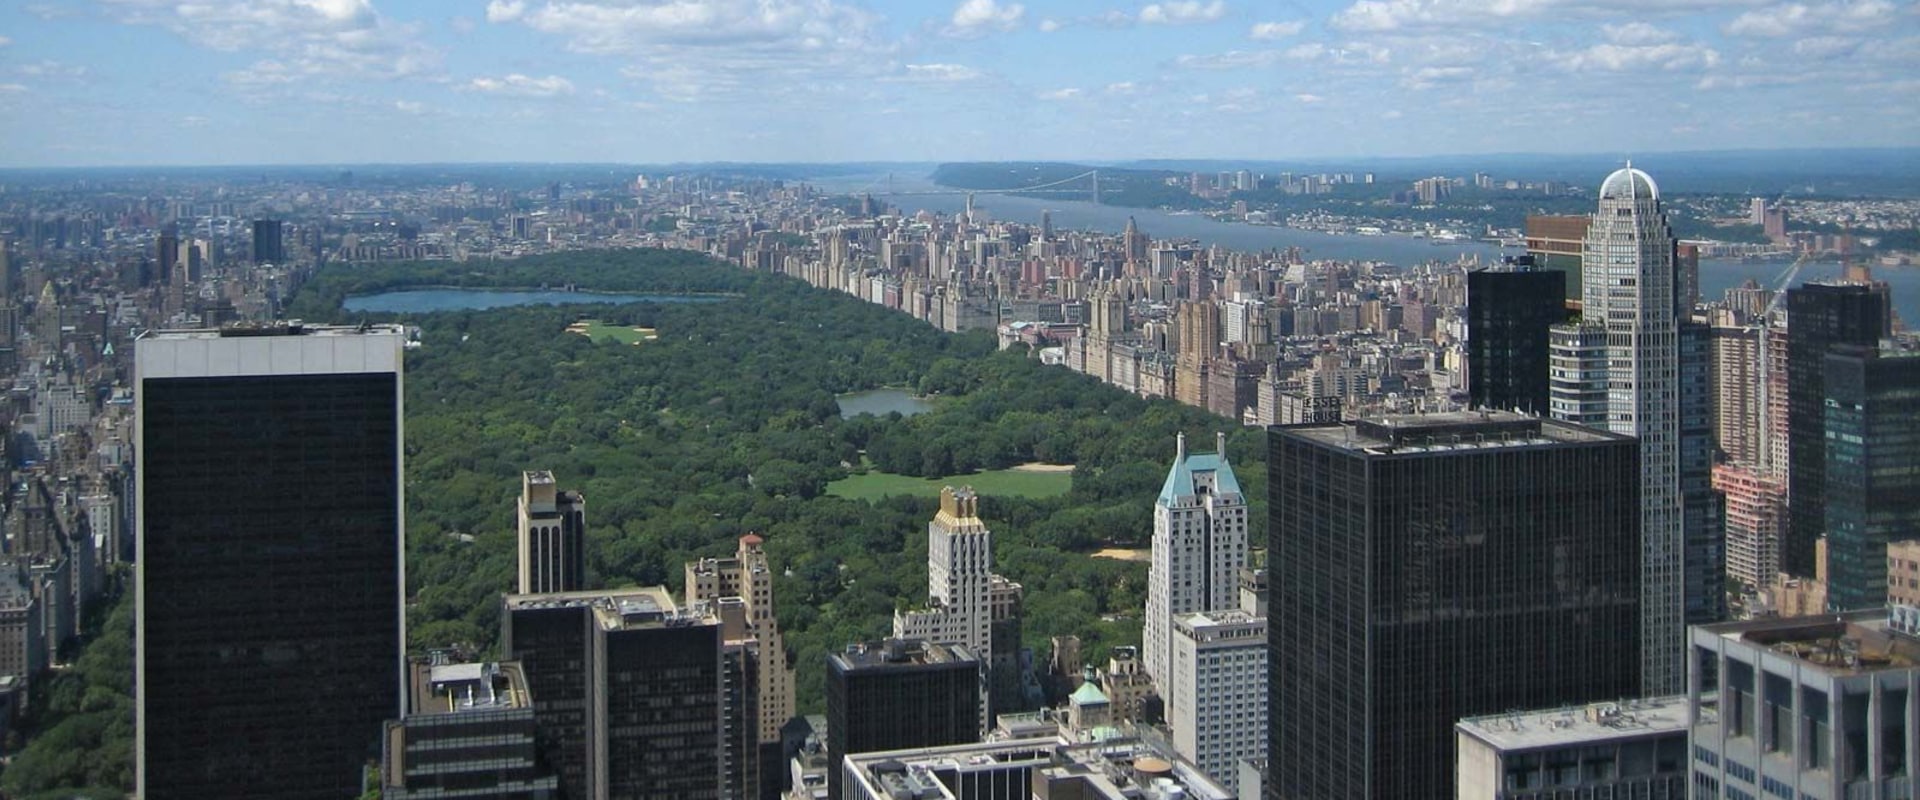 The Extensive Park System of New York City: How Much of the City is Parks?